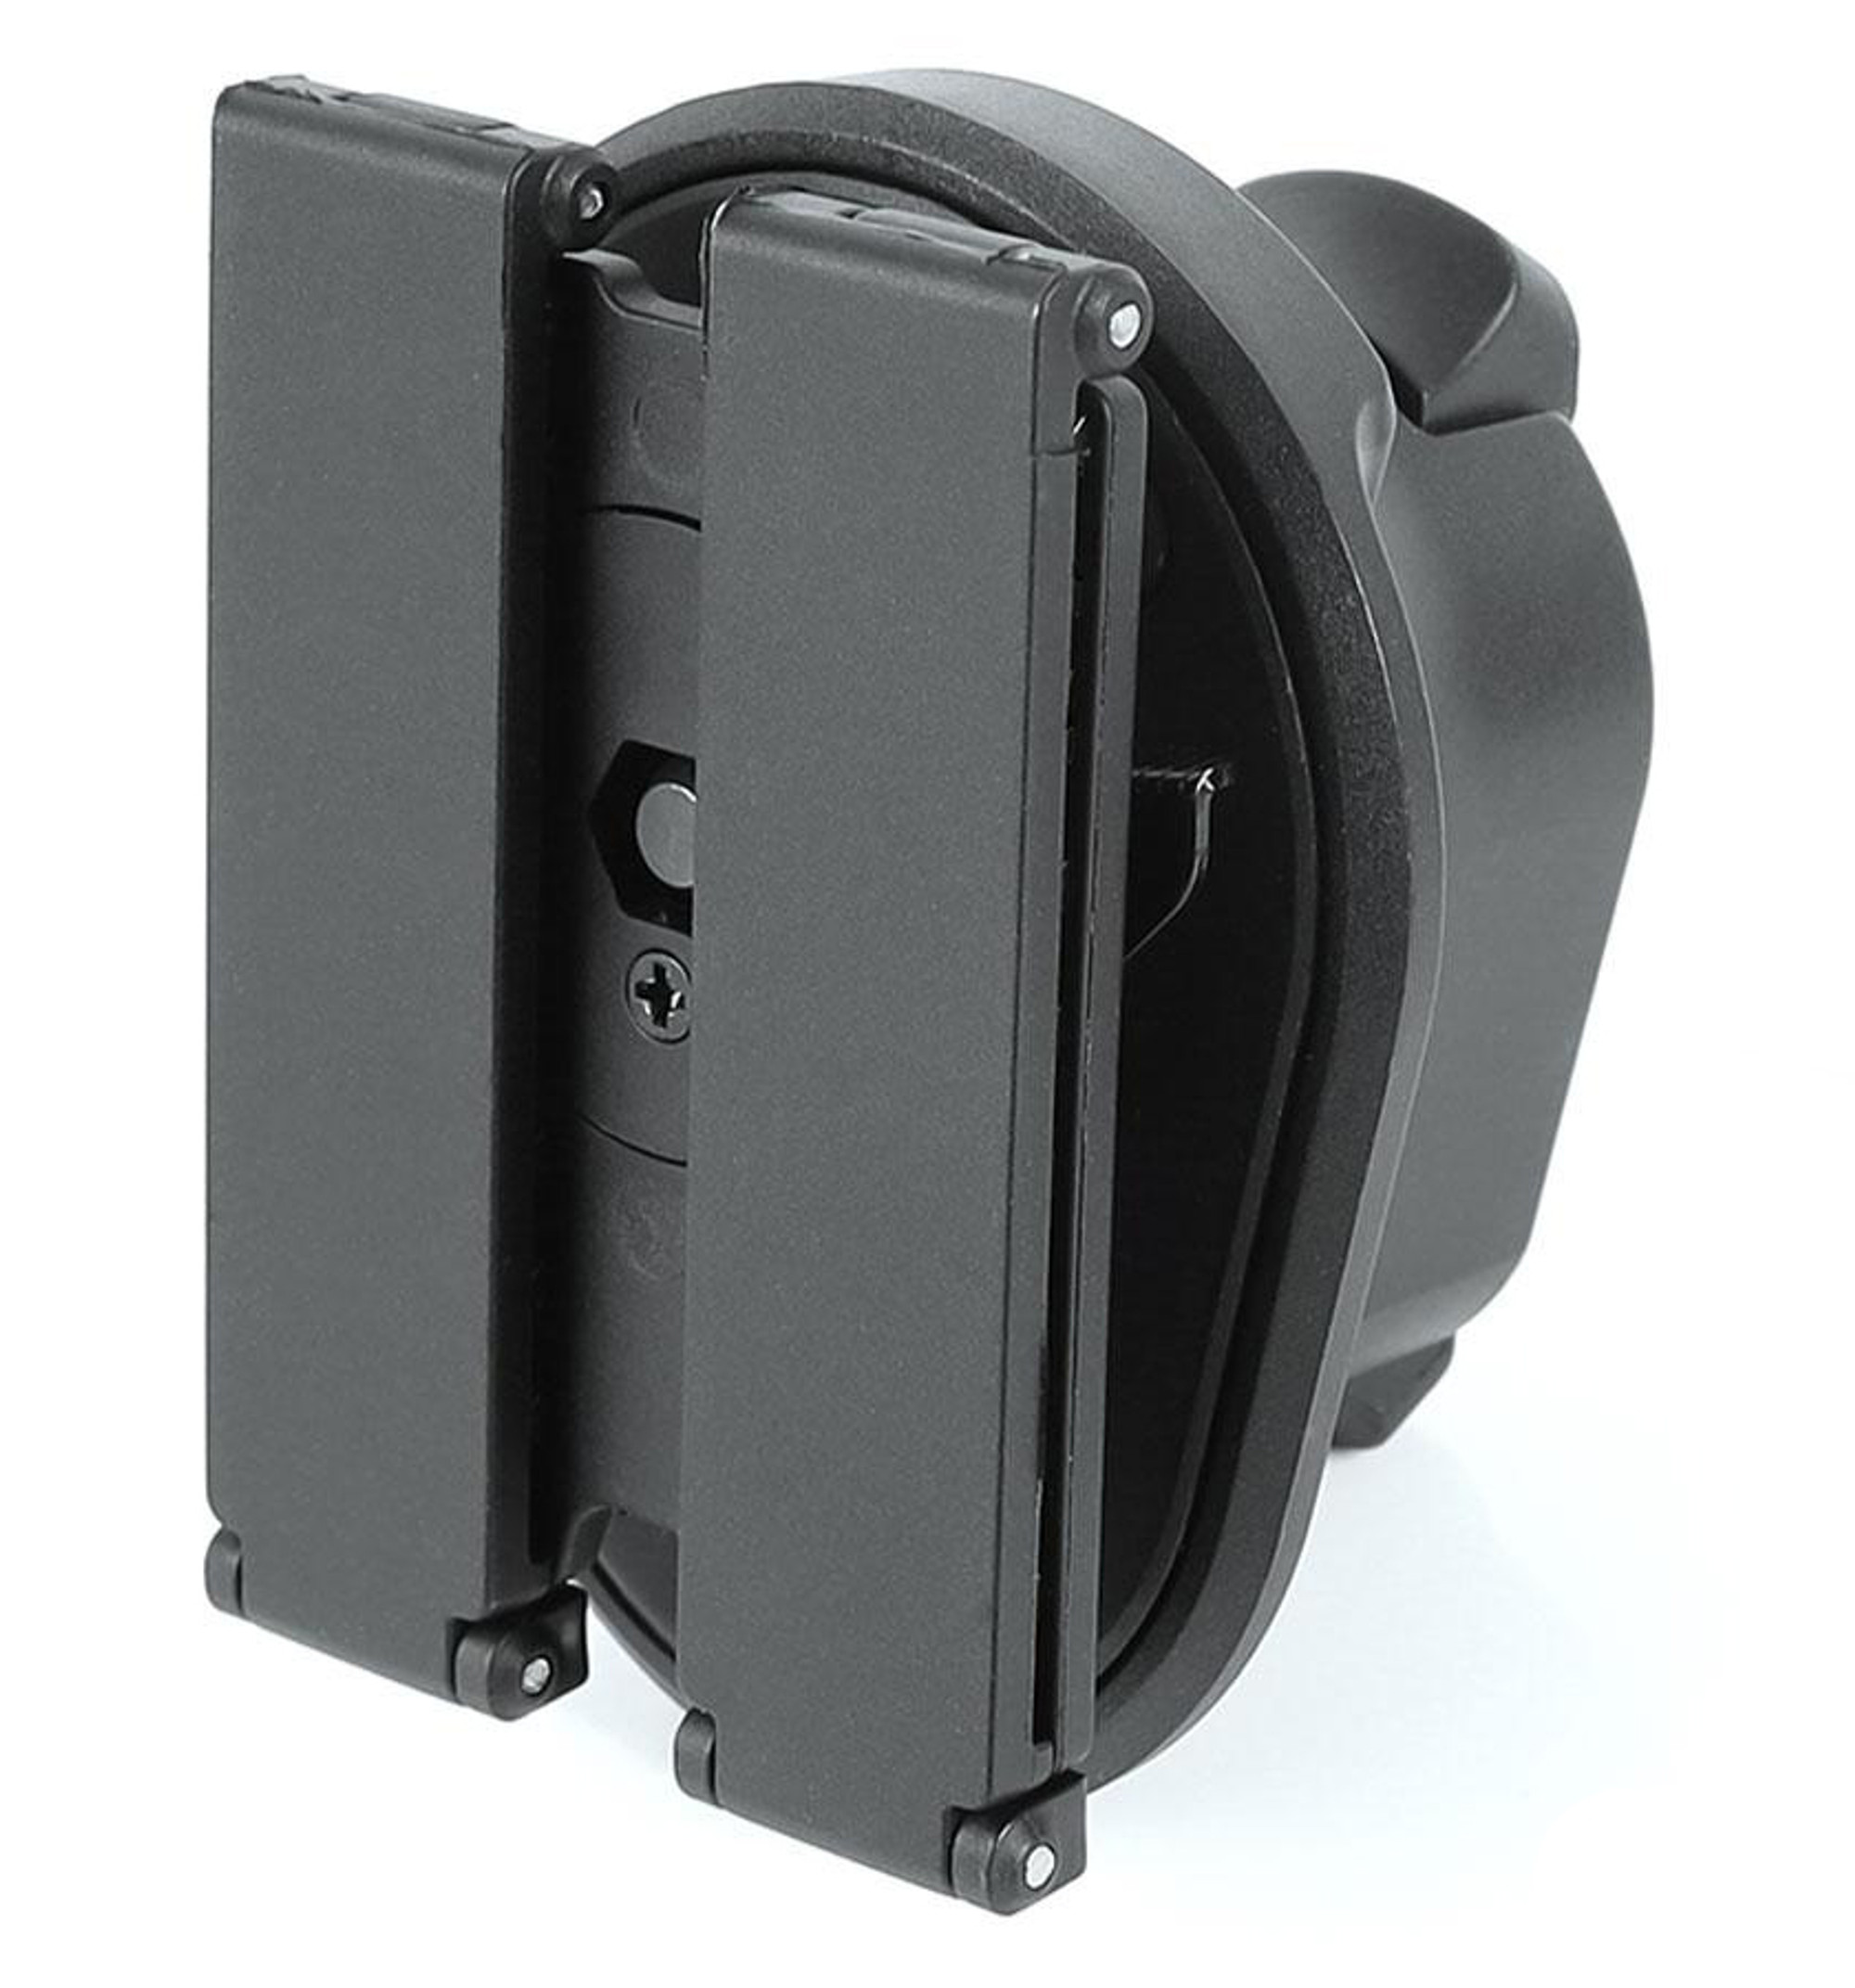 Laylax Battle Style P90 Quick Holster